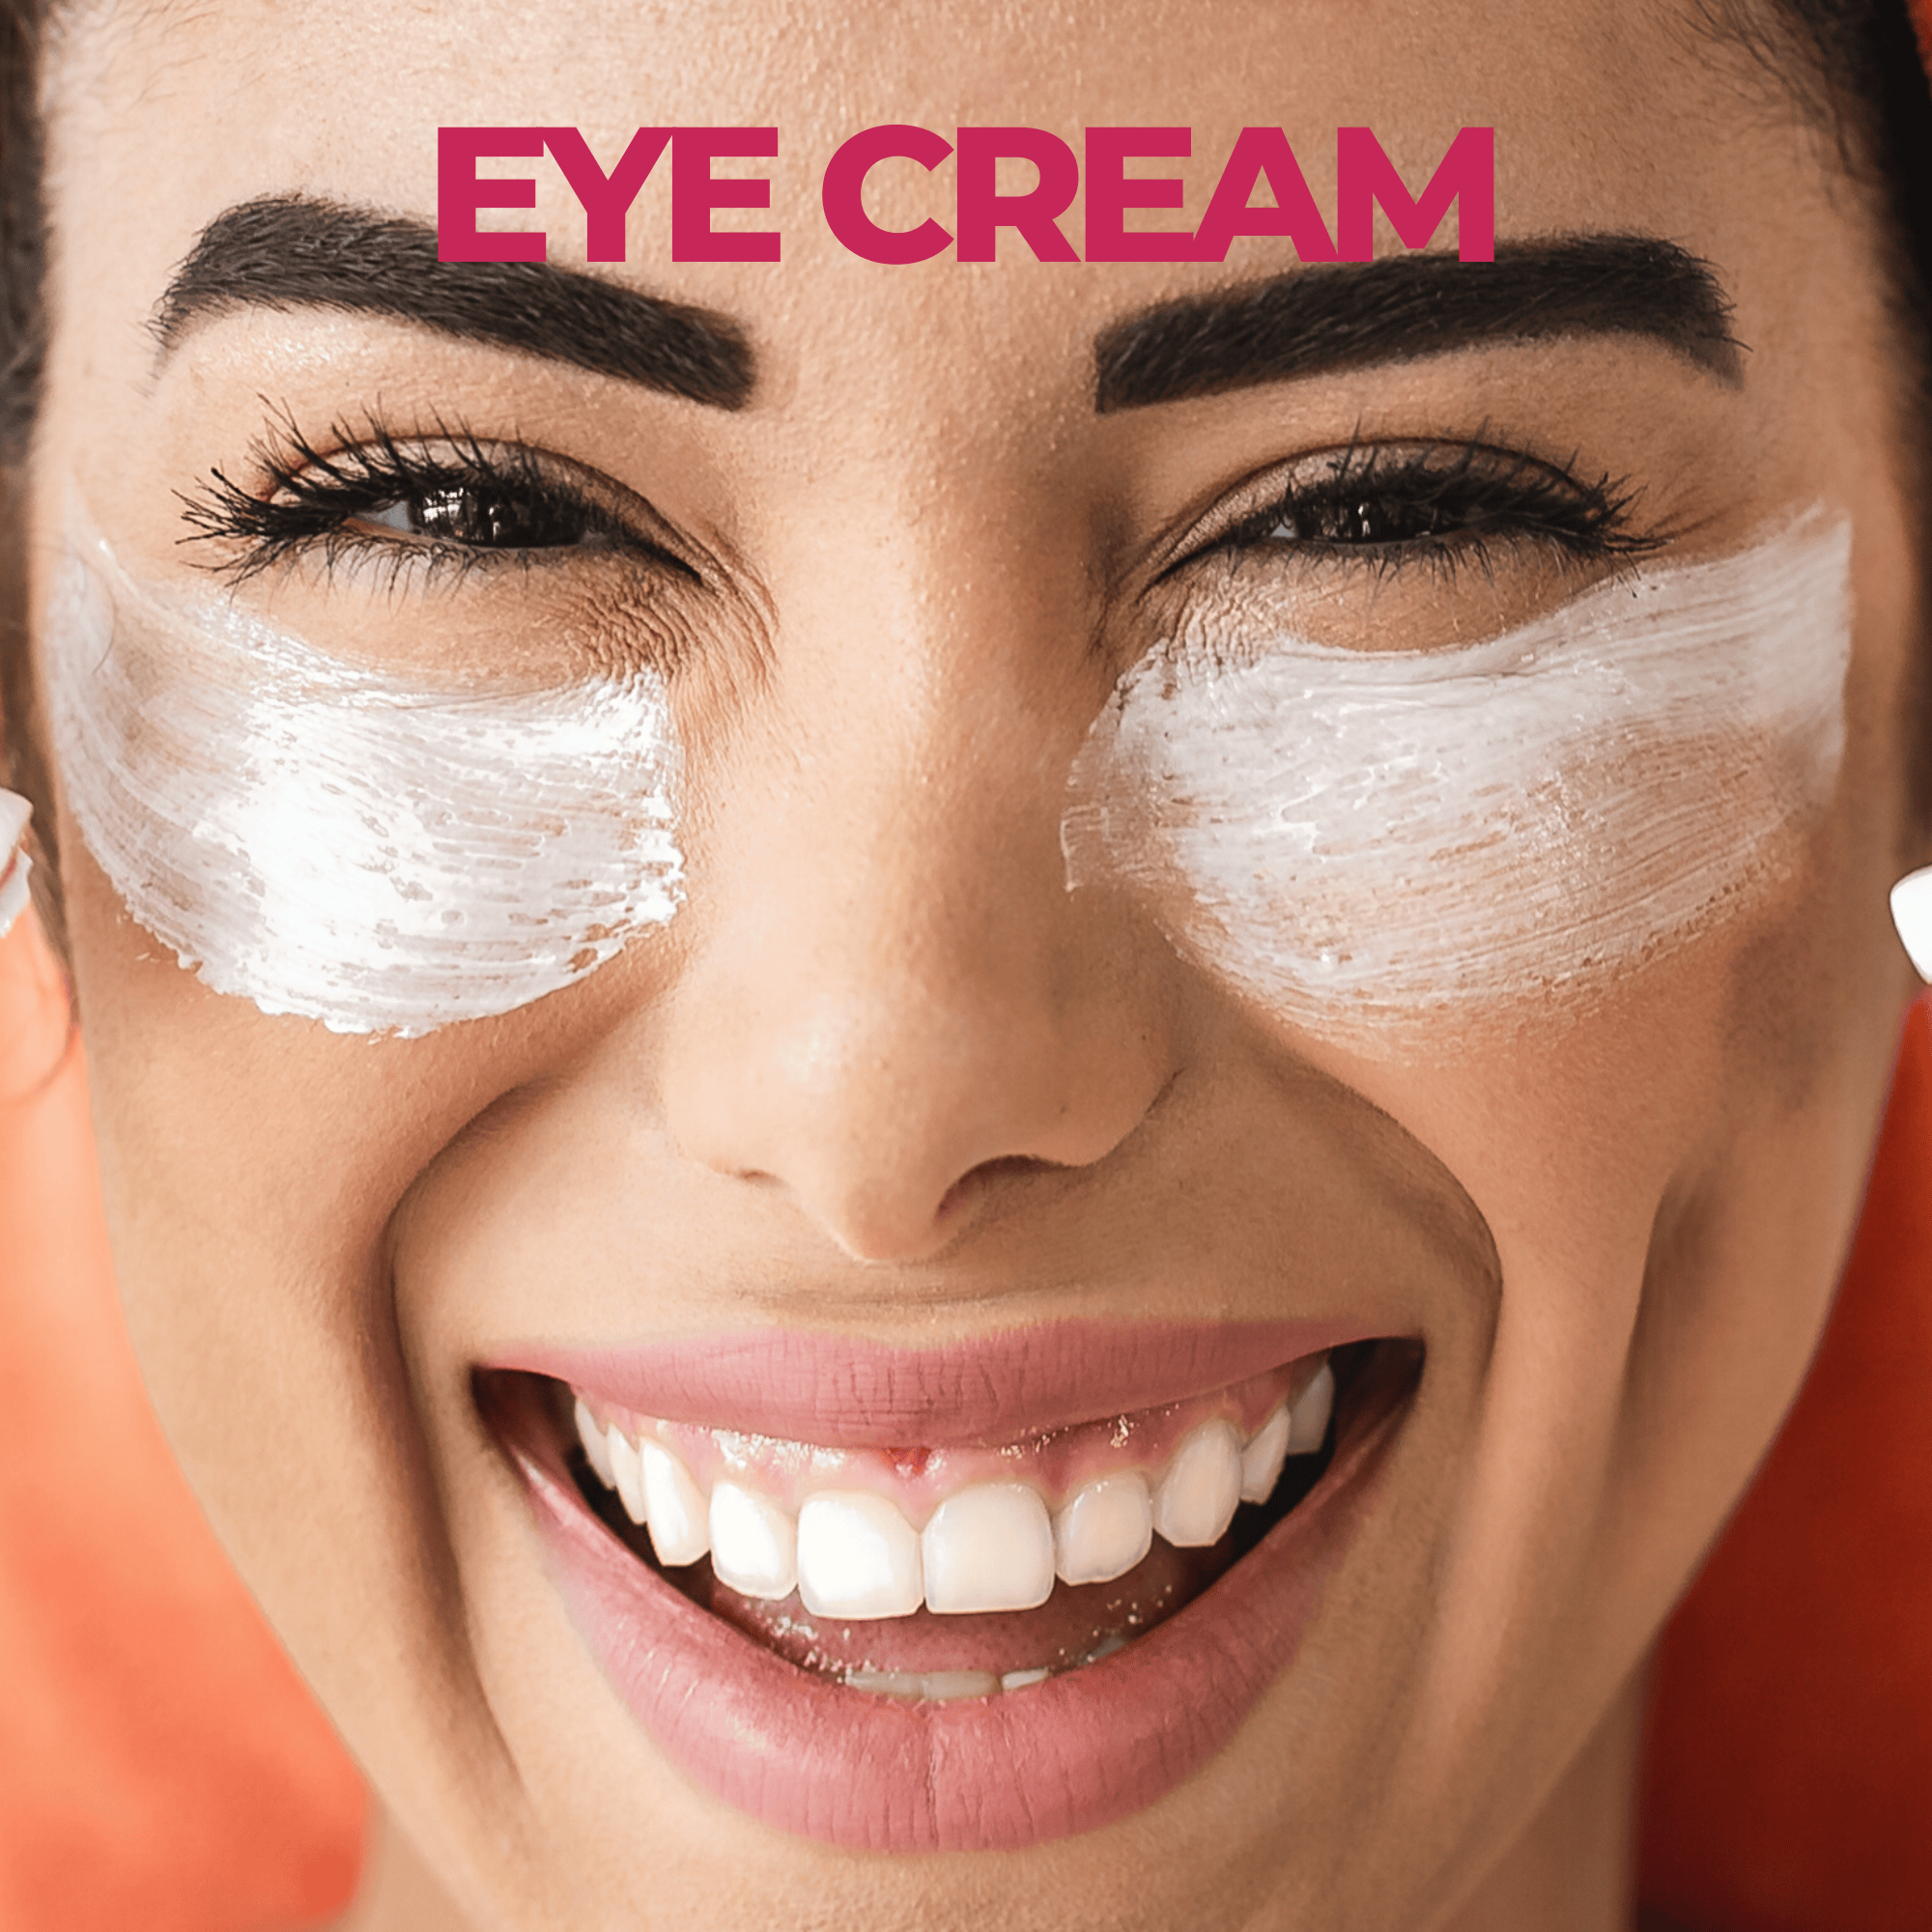 What You Need to Know About Using Eye Cream